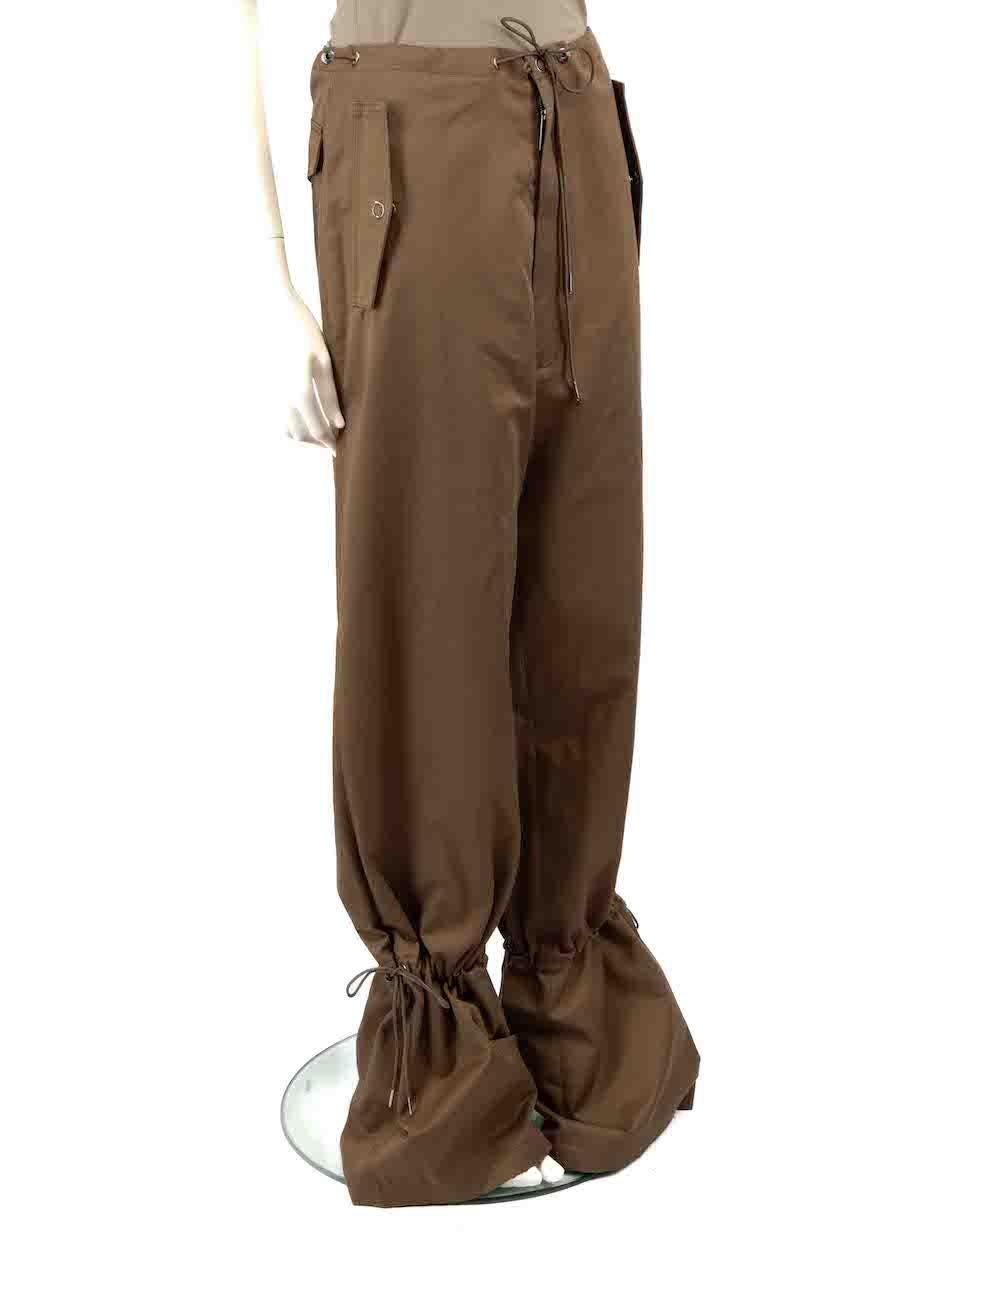 CONDITION is Never worn, with tags. No visible wear to trousers is evident on this new Dion Lee designer resale item.
 
 
 
 Details
 
 
 Brown
 
 Cotton
 
 Trousers
 
 Wide leg
 
 High rise
 
 Drawstring waist and leg cuffs
 
 2x Side pockets
 
 1x